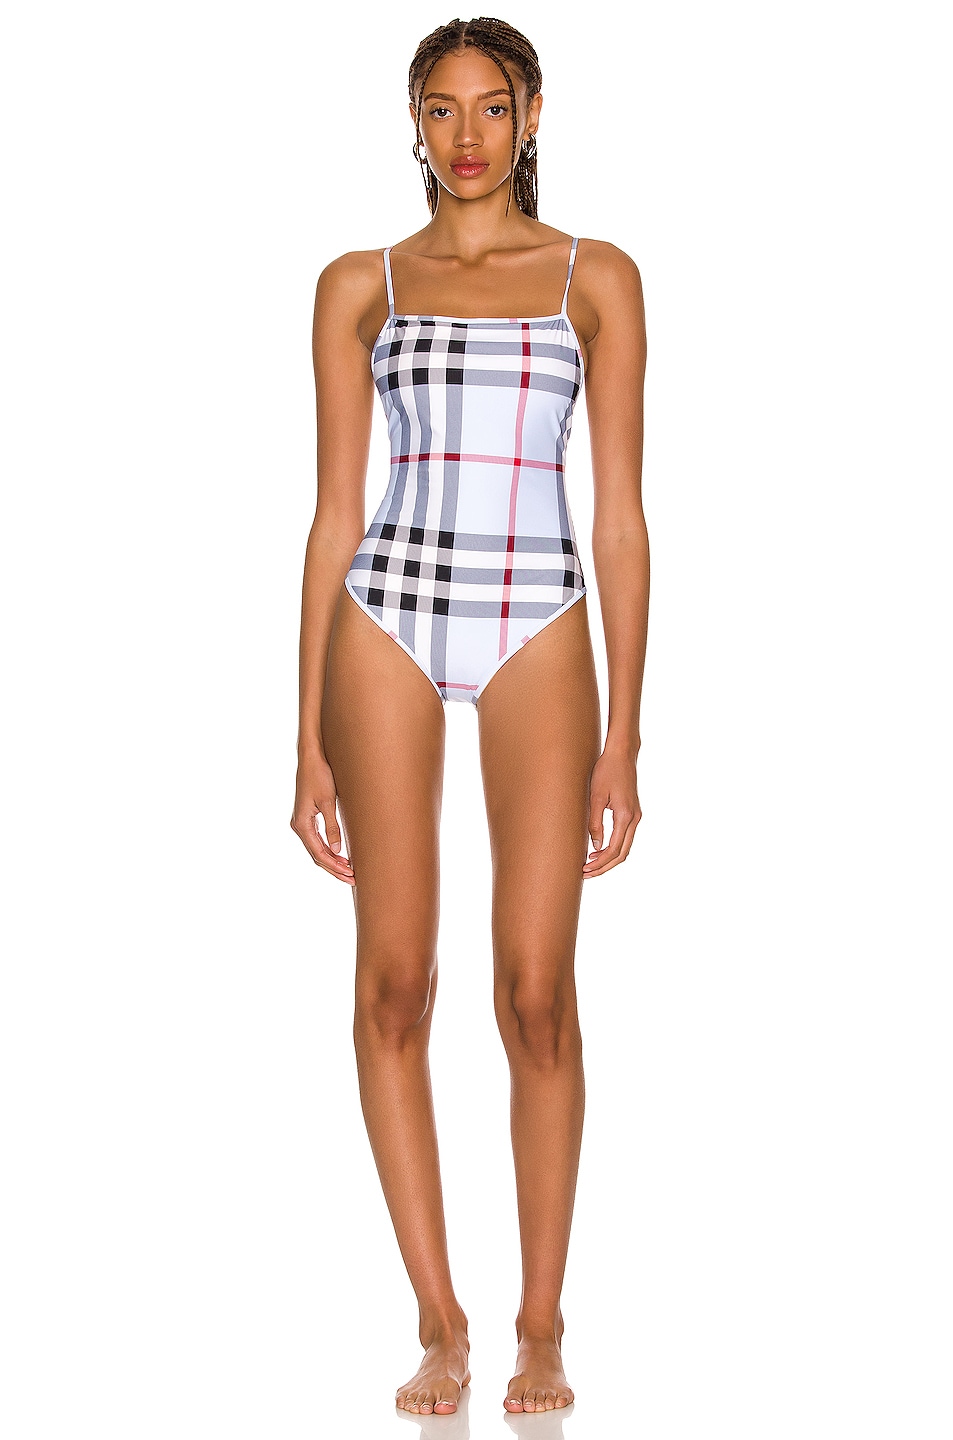 Image 1 of Burberry Delia One Piece Swimsuit in Pale Blue IP Check